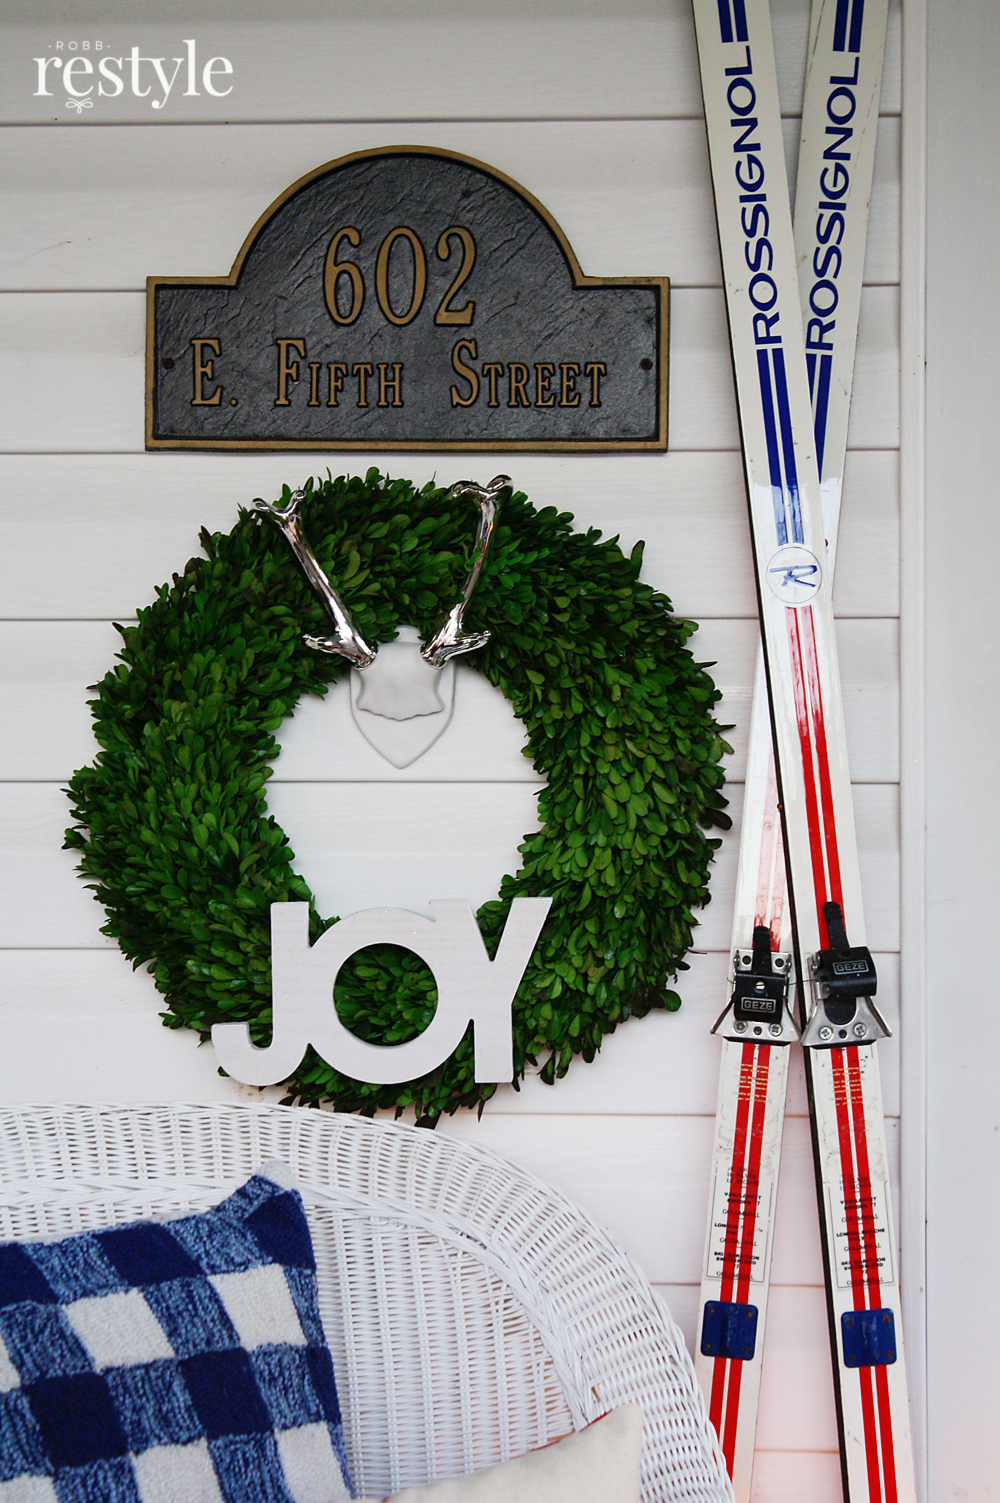 Vintage Christmas Cabin Skis and Wreath